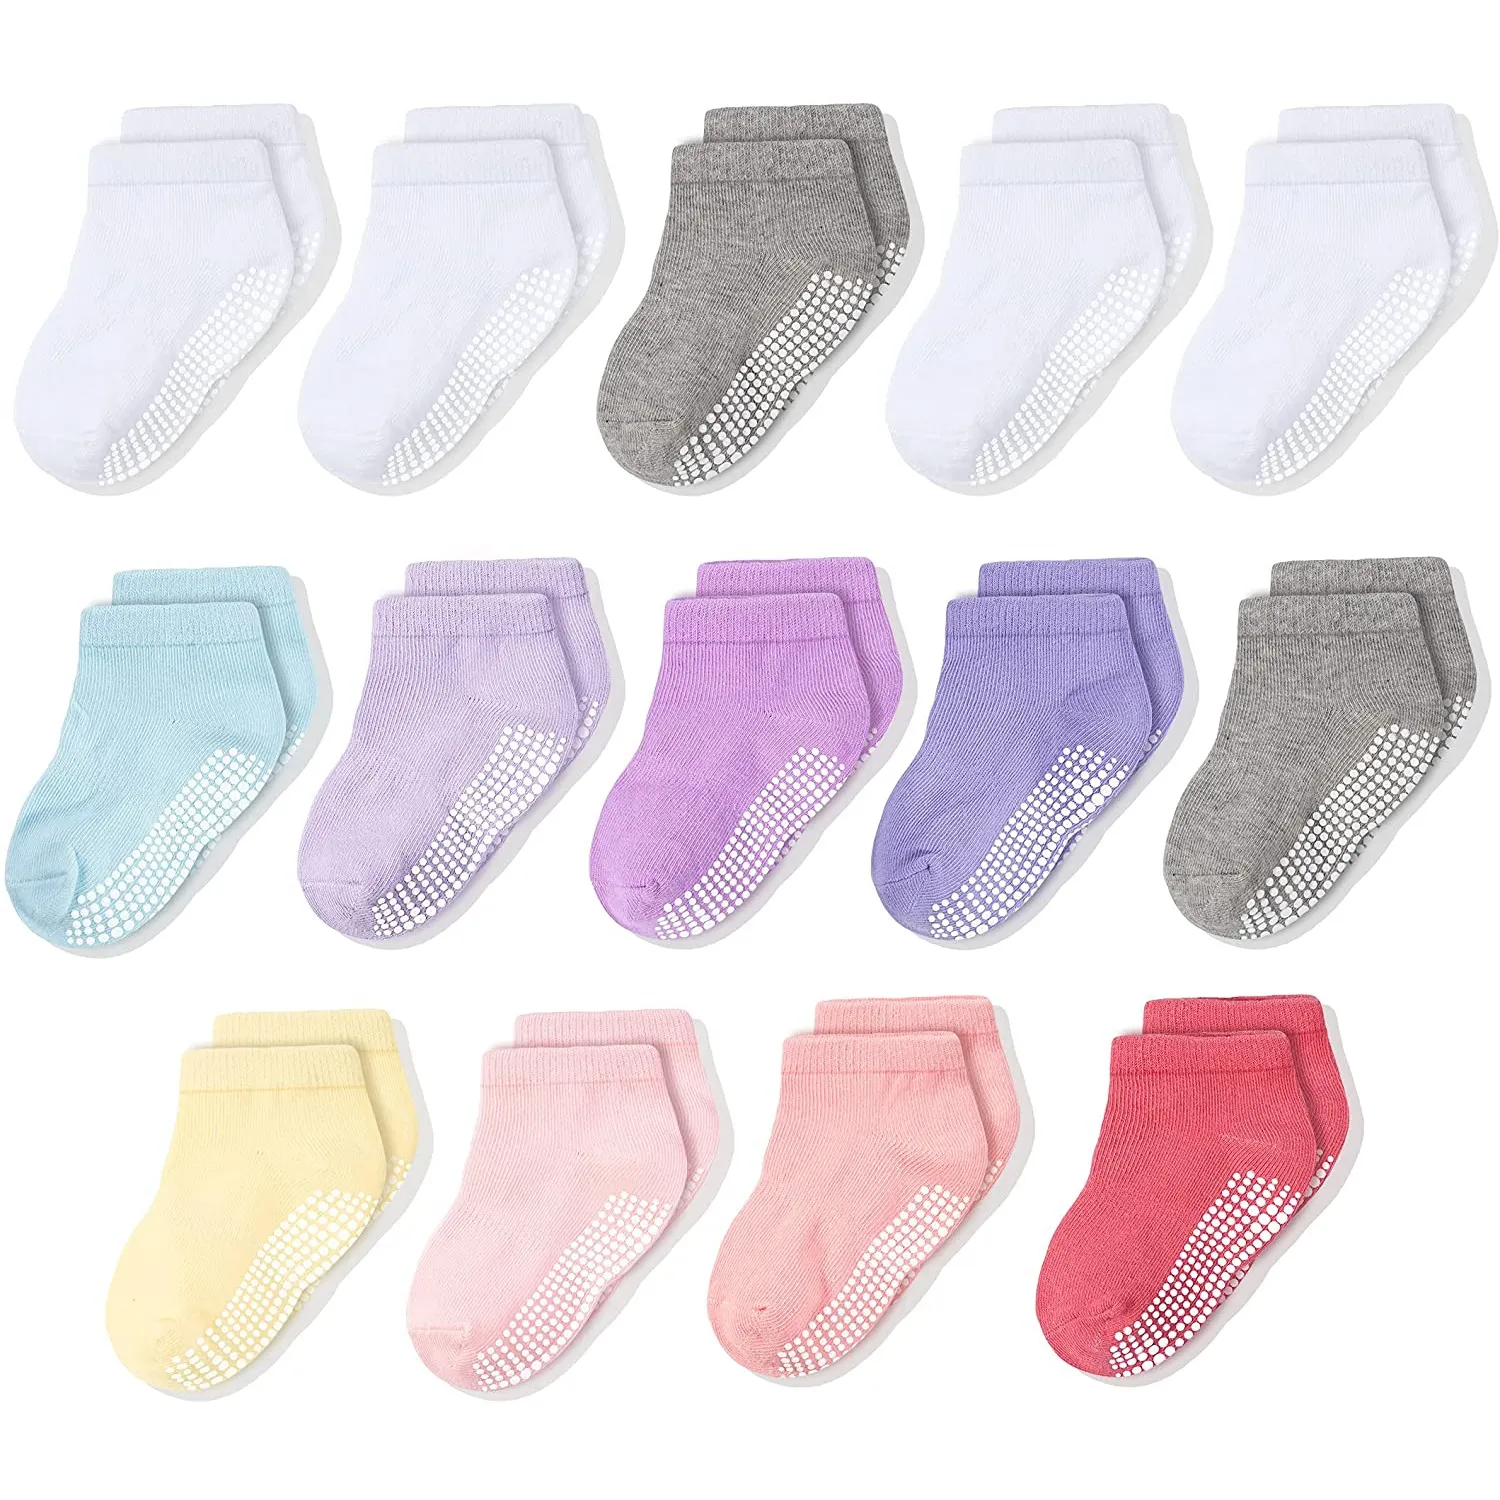 Grip Combed Cotton Socks Baby Cute Ankle Kids Socks Anti-slip Casual Knitted Socks for Children from 8 Years in Cotton Crew